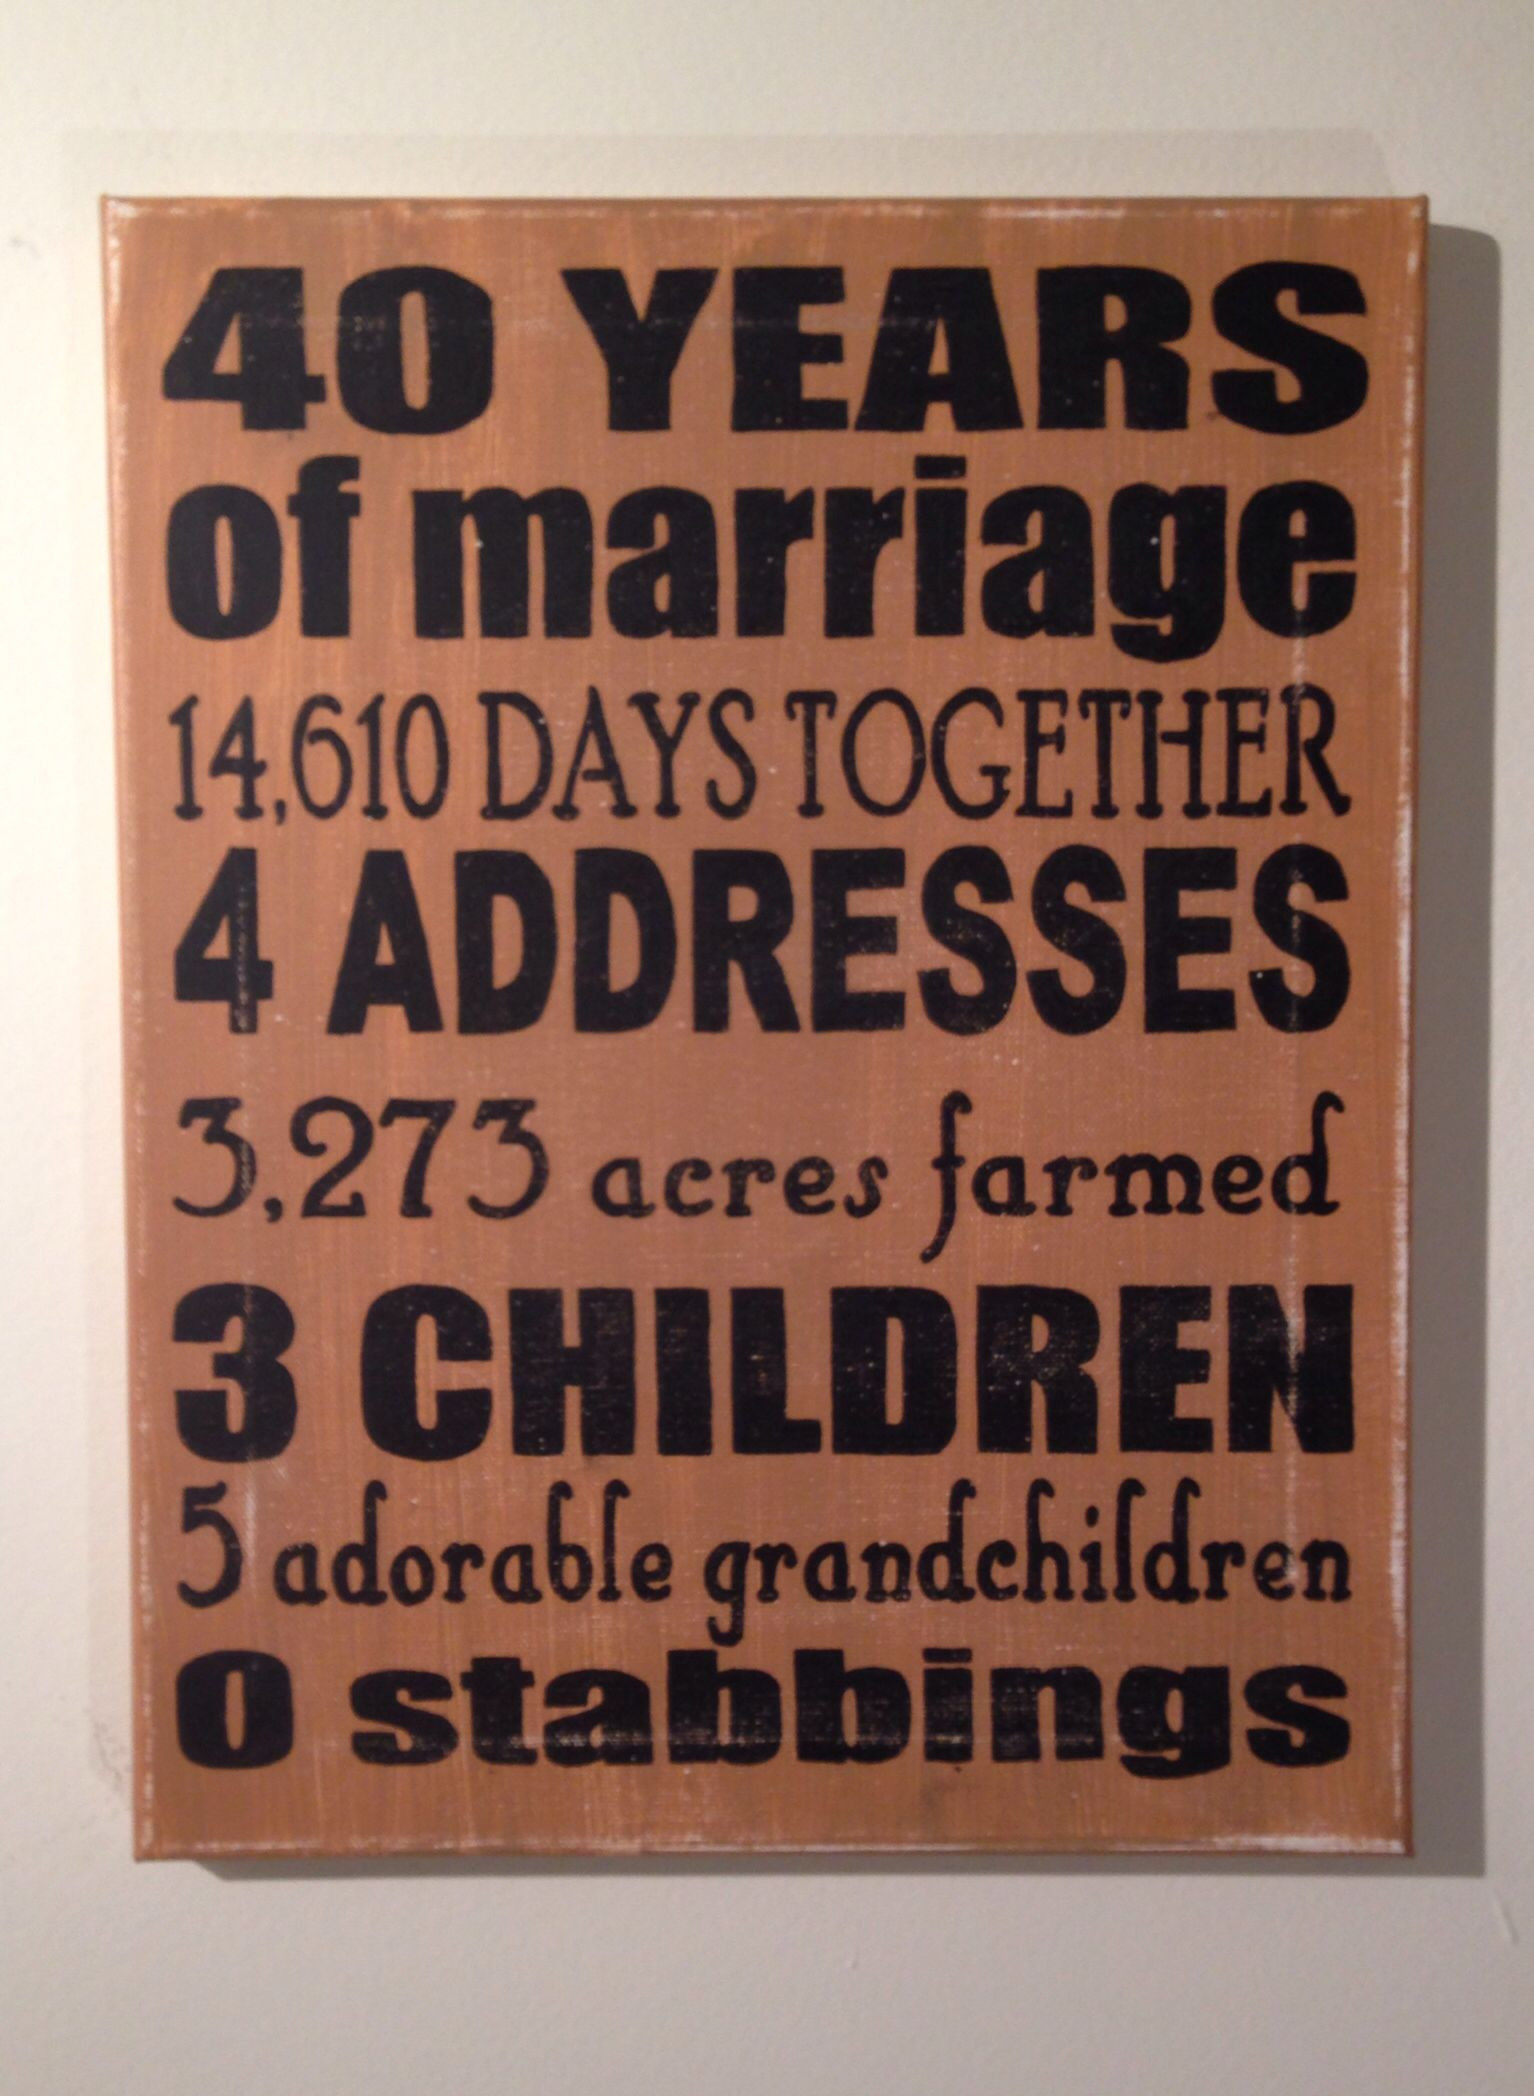 40th Wedding Anniversary Gift Ideas For Parents
 Wedding Anniversary Gifts 40th Wedding Anniversary Gifts